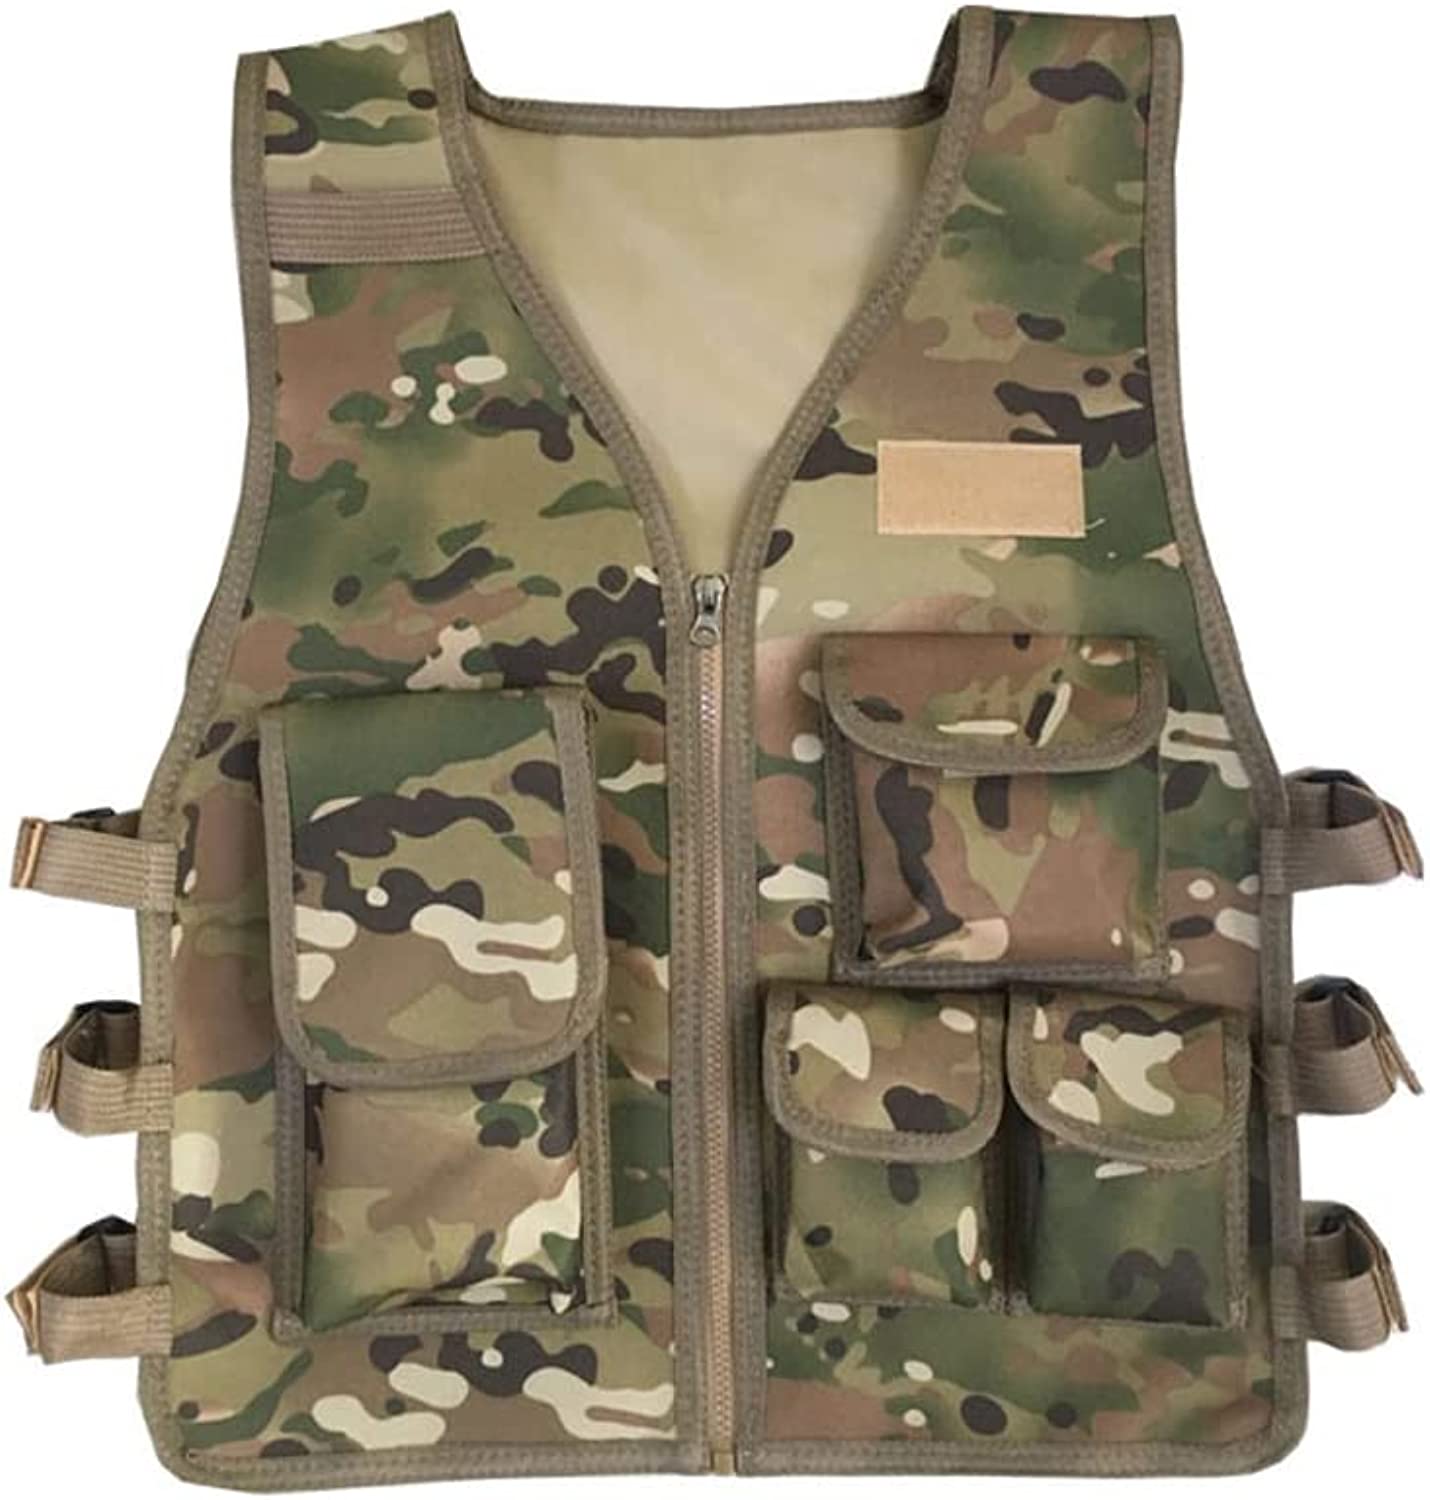 AZB Kids Tactical Vest, Lightweight Airsoft Vest-Adjustable to Fit Ages 7-14 Yrs, Paintball Vest for Games or Training